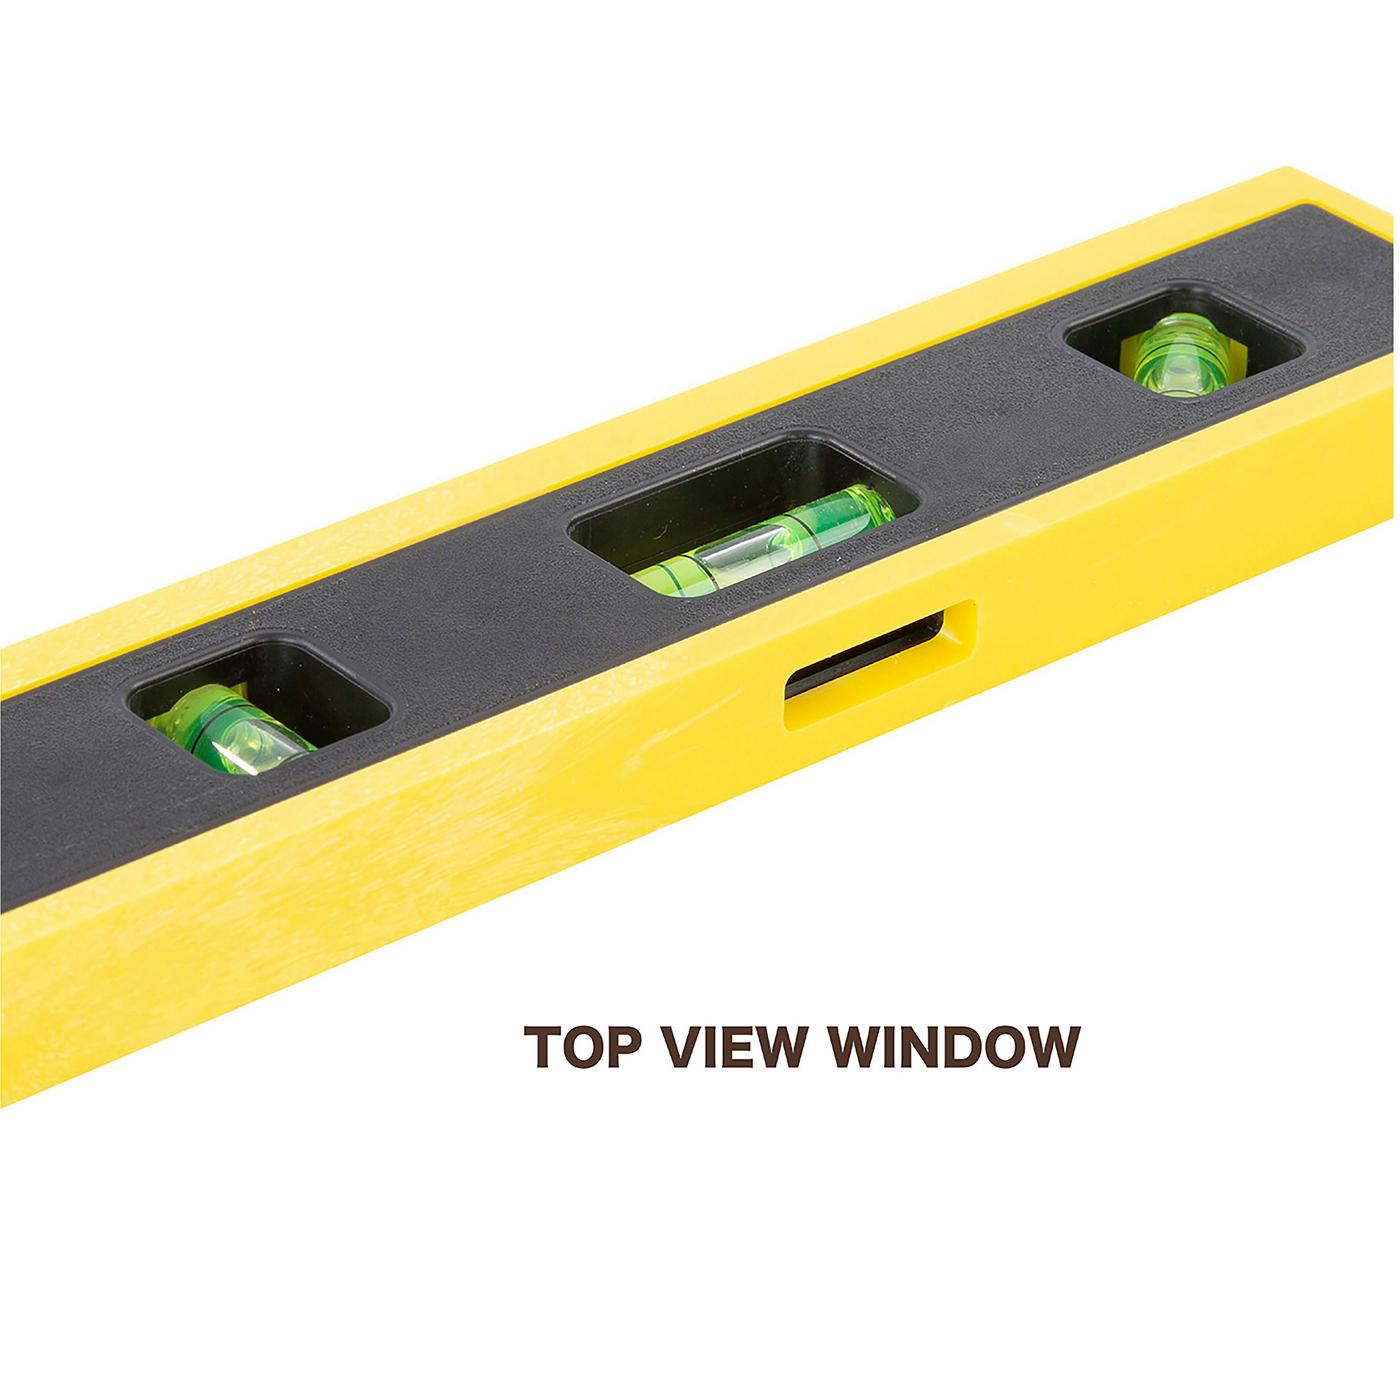 Mayes Professional Torpedo Level with Magnetic V-Groove Edge; image 7 of 7